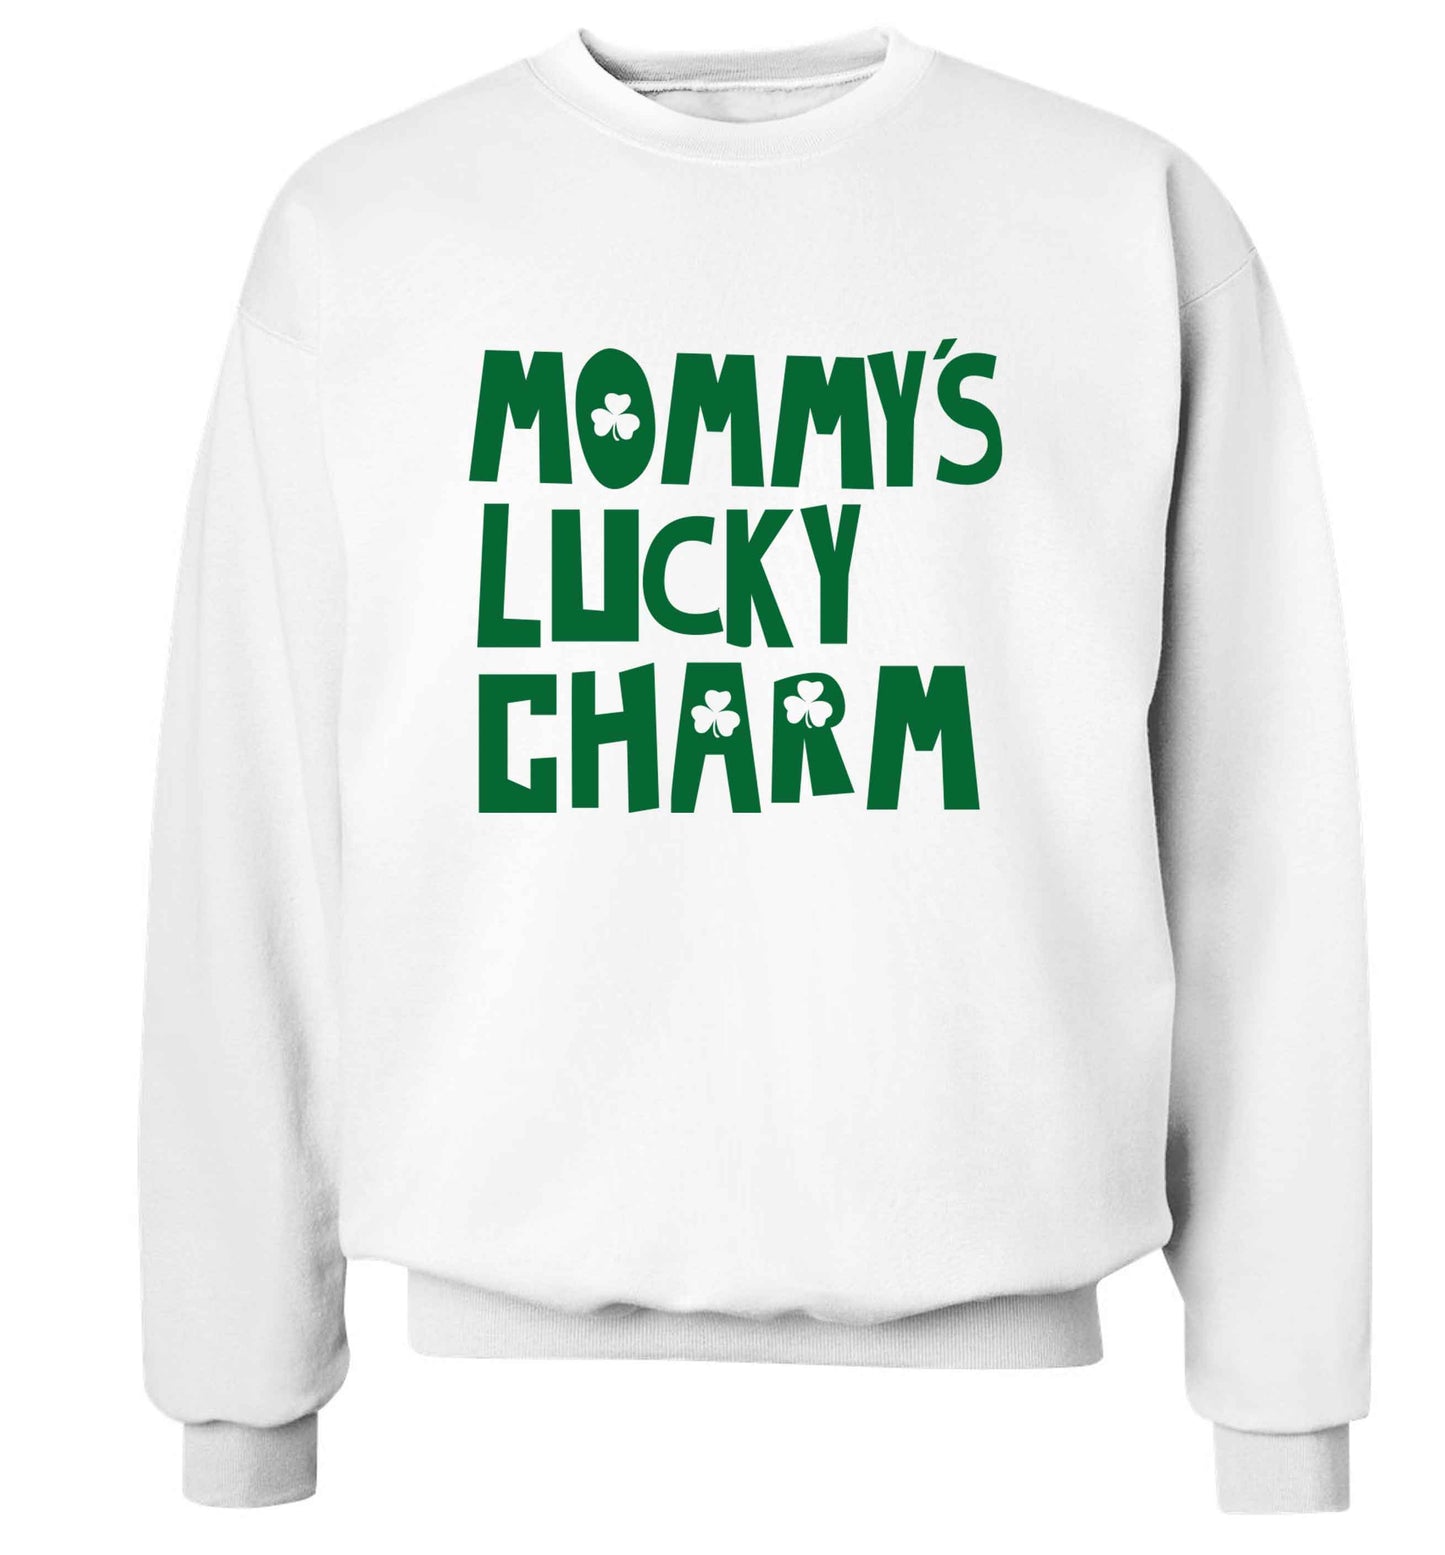 Mommy's lucky charm adult's unisex white sweater 2XL